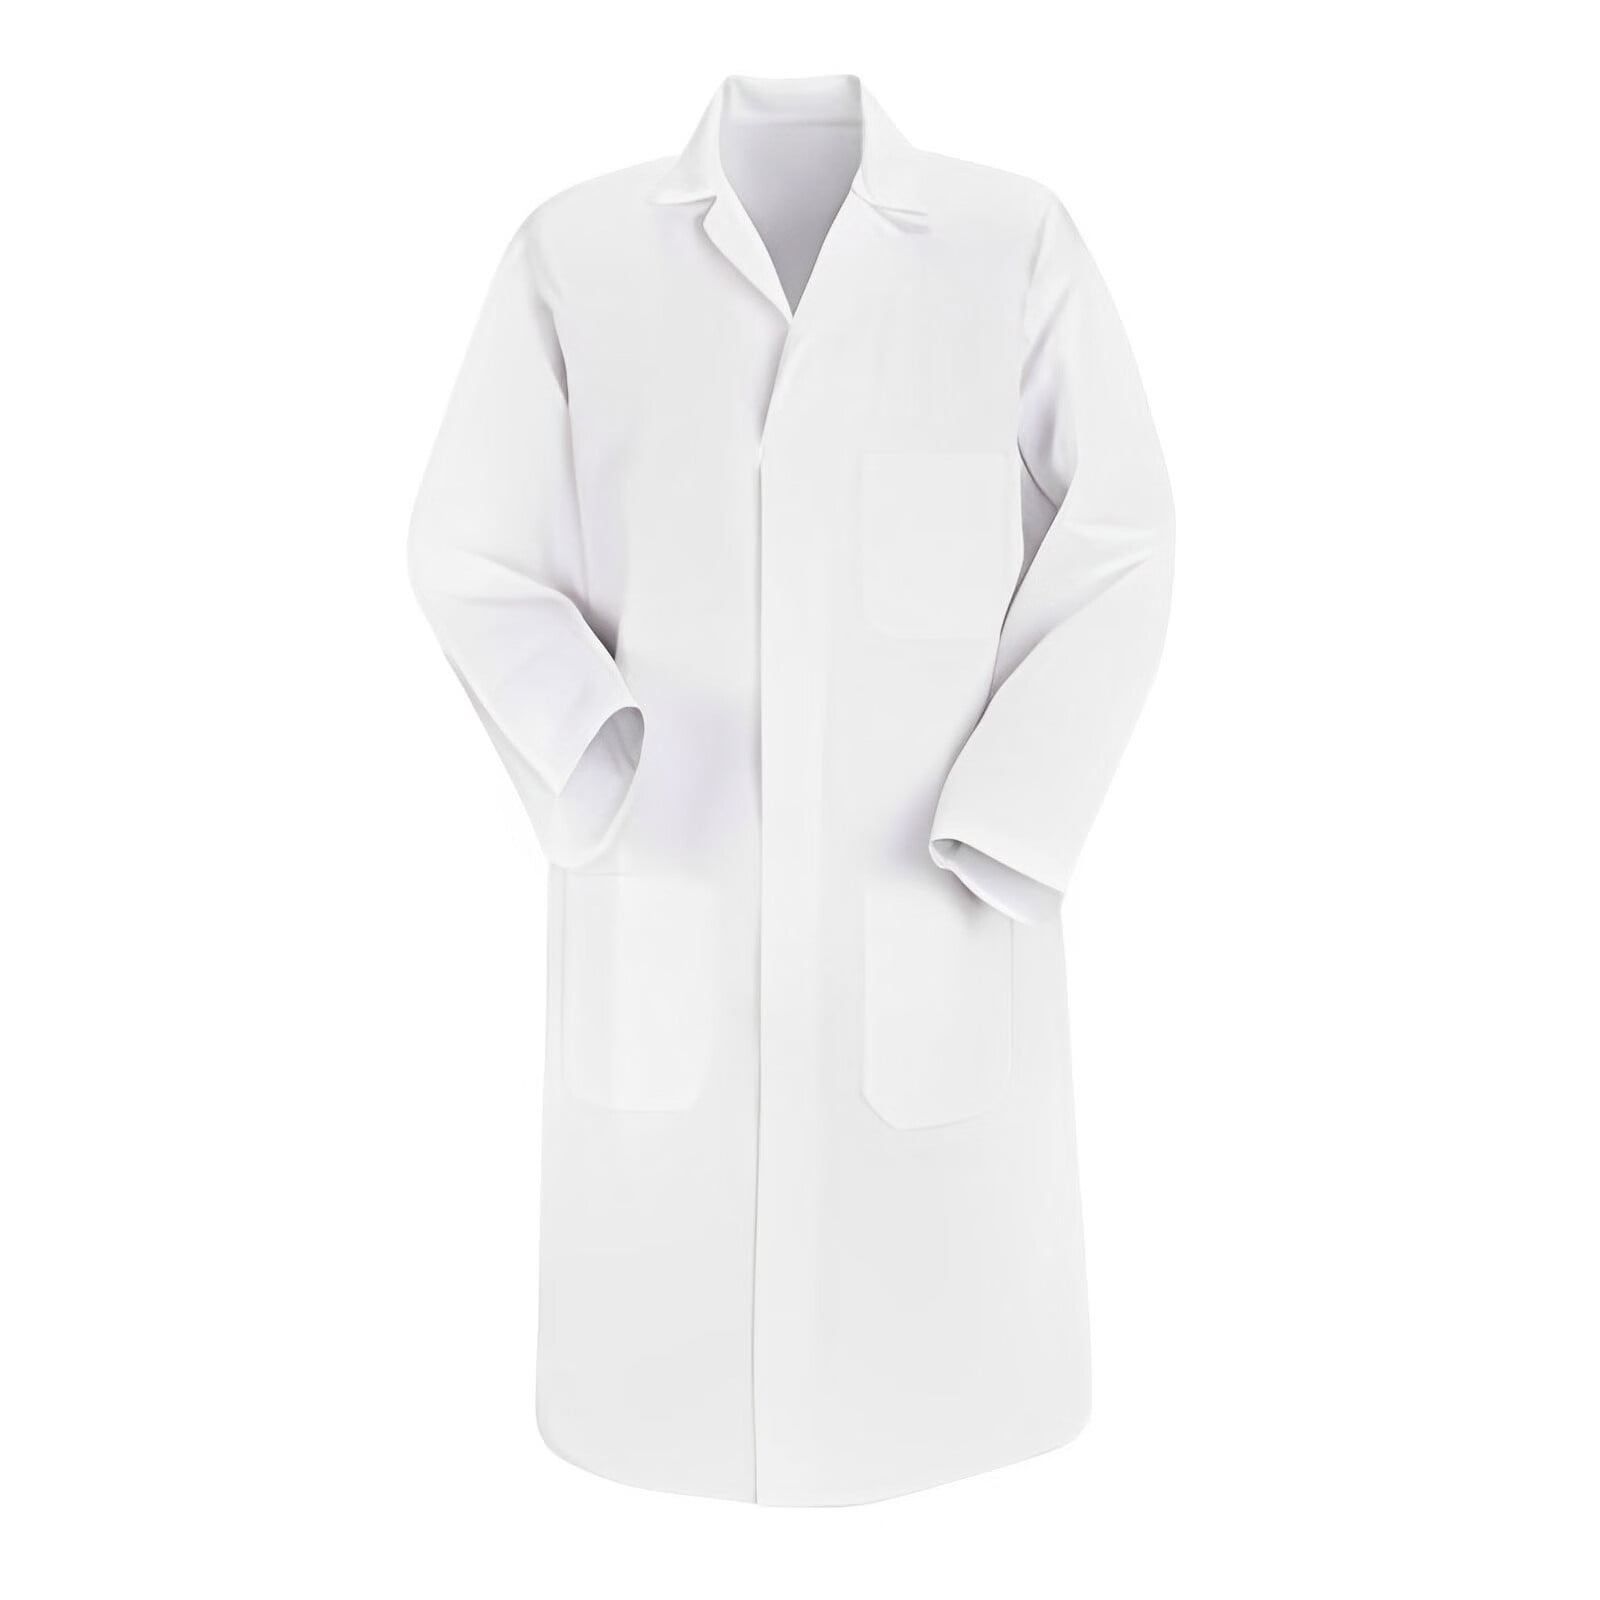 Mens Long Sleeved White Coat Laboratory Mens And Womens Industrial ...